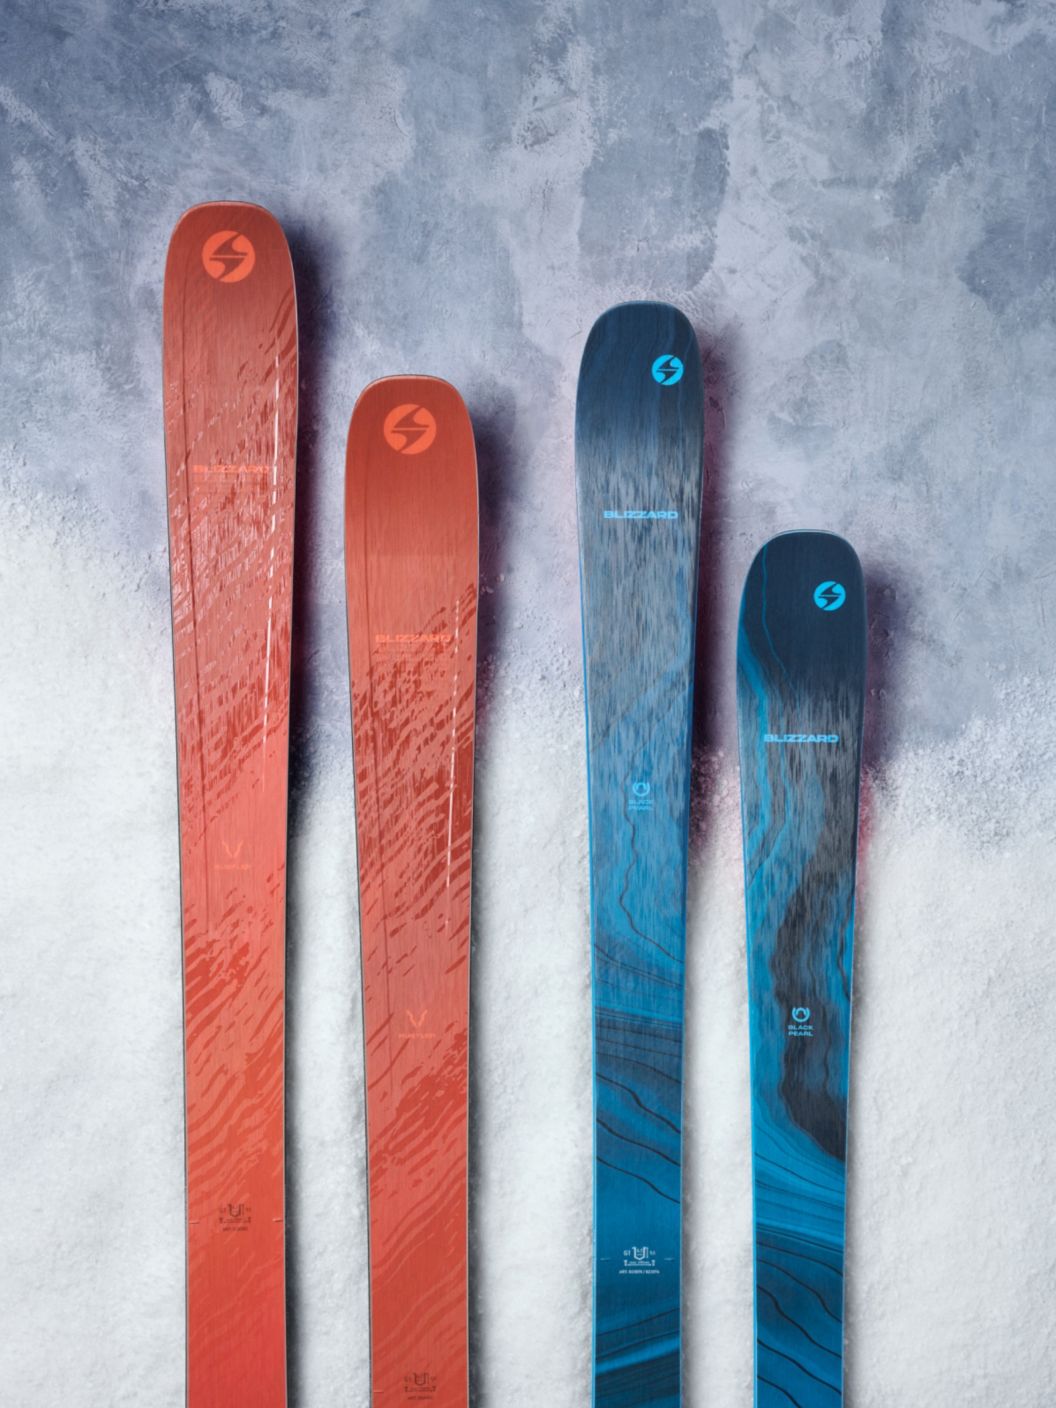 A pair of Blizzard Hustle 10 skis next to Blizzard Black Pearl 88s. 